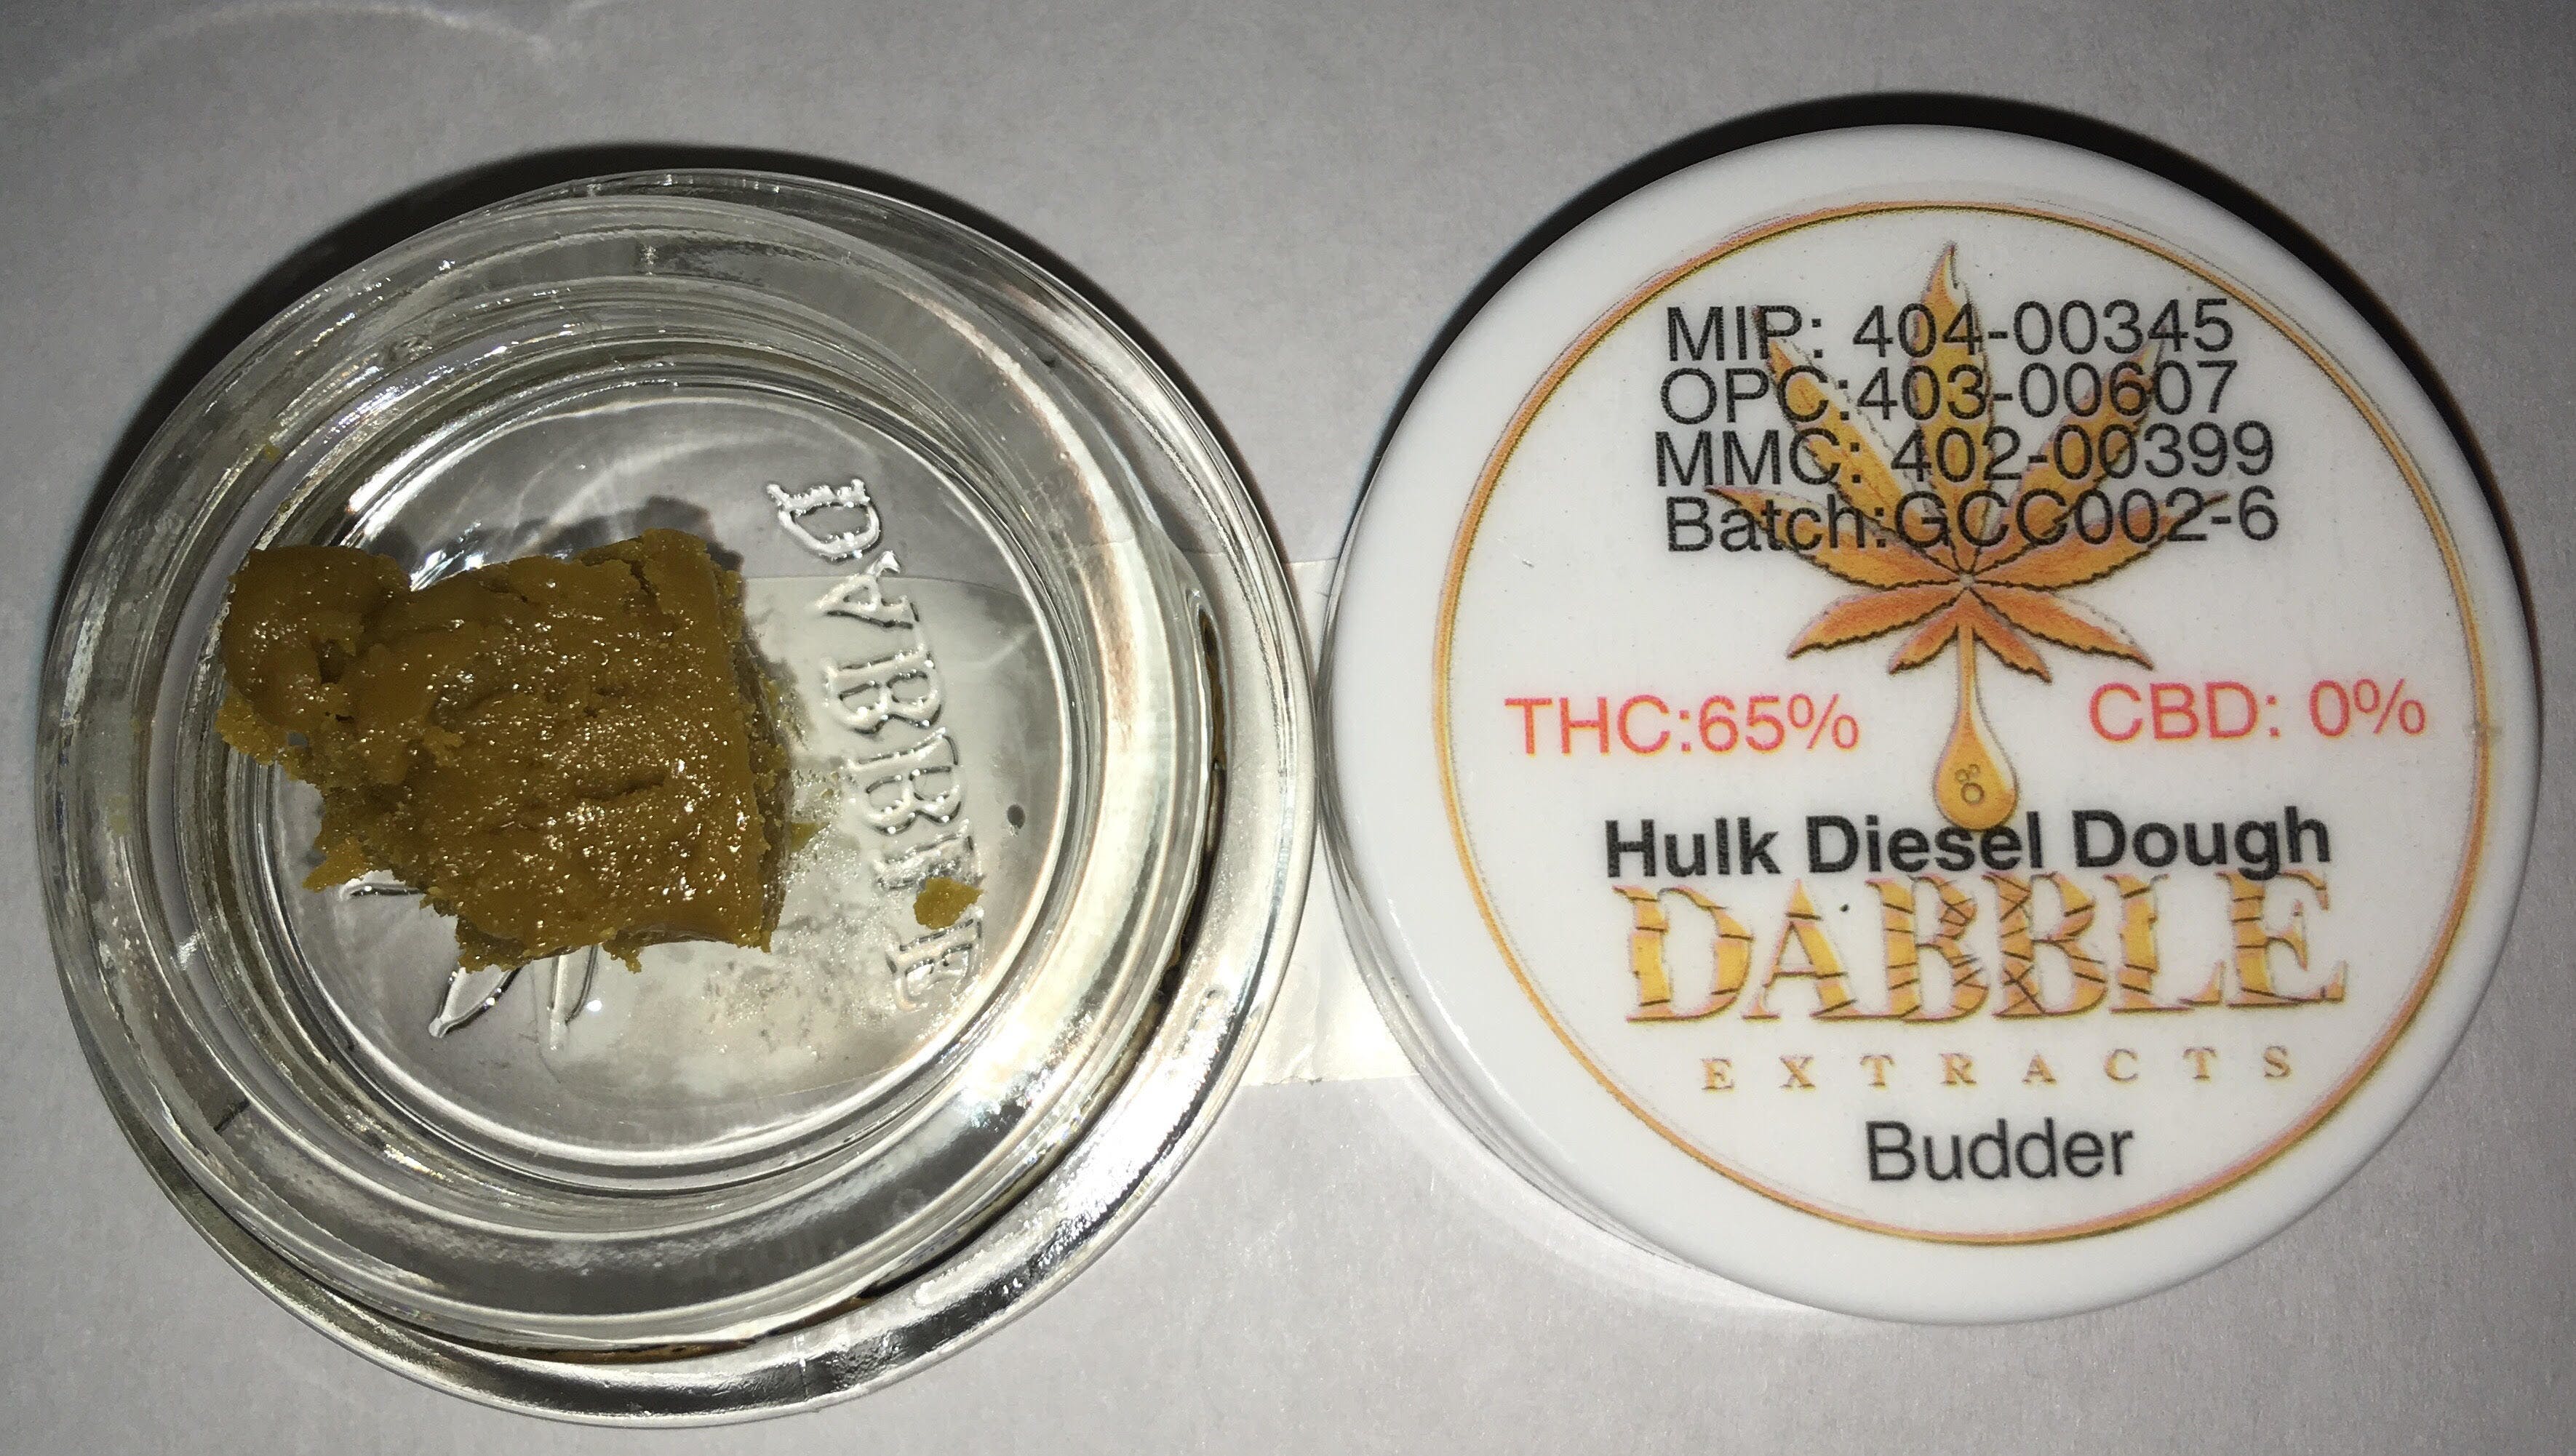 concentrate-dabble-hulk-diesel-budder